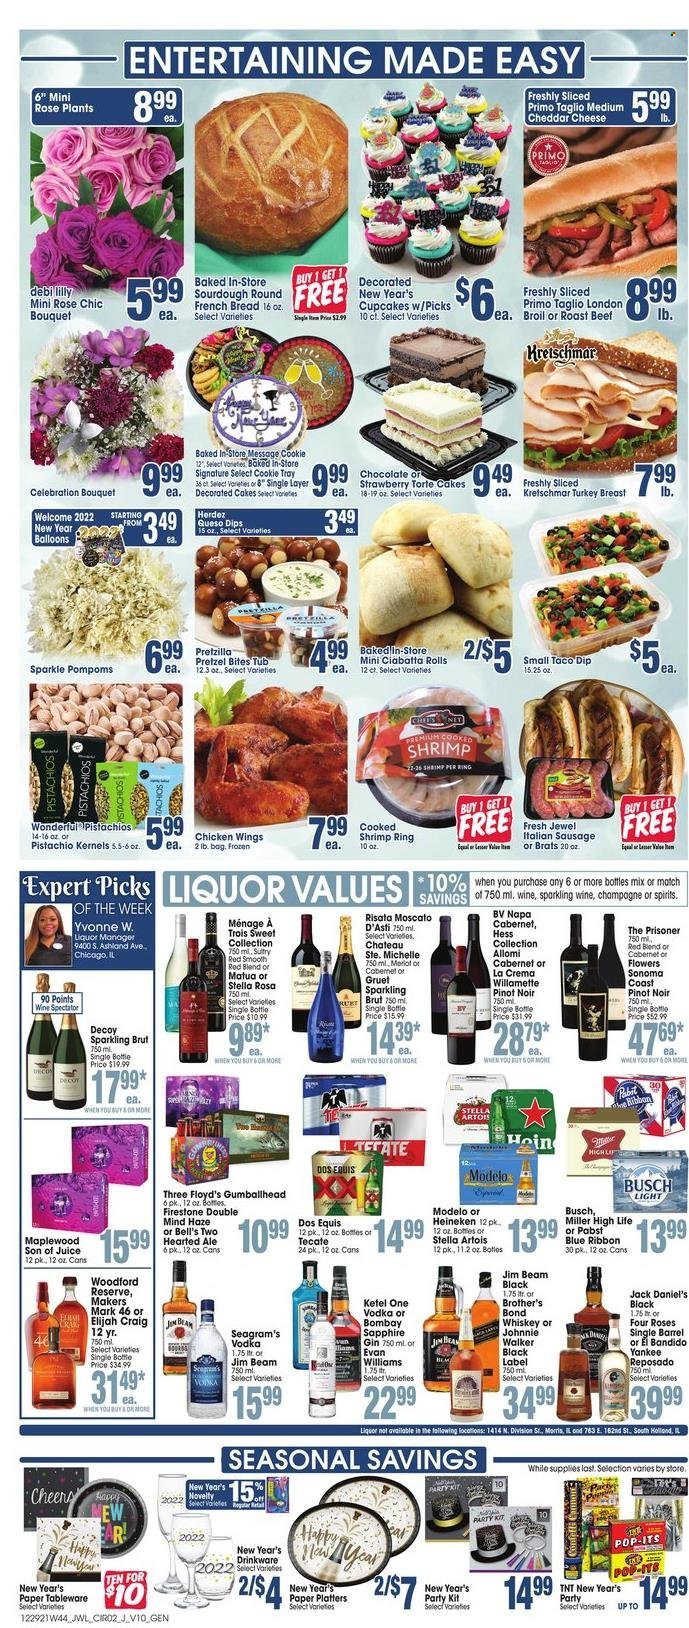 thumbnail - Jewel Osco Flyer - 12/29/2021 - 01/04/2022 - Sales products - bread, ciabatta, pretzels, cake, Blue Ribbon, french bread, cupcake, shrimps, Jack Daniel's, sausage, italian sausage, cheddar, cheese, dip, chicken wings, chocolate, Celebration, pistachios, juice, Cabernet Sauvignon, red wine, sparkling wine, champagne, wine, Pinot Noir, Moscato, rosé wine, gin, vodka, whiskey, Johnnie Walker, Jim Beam, whisky, beer, Busch, Heineken, Miller, Modelo, beef meat, roast beef, Brut, bag, drinkware, tableware, Brother, paper, balloons, bouquet, Stella Artois, Dos Equis. Page 2.